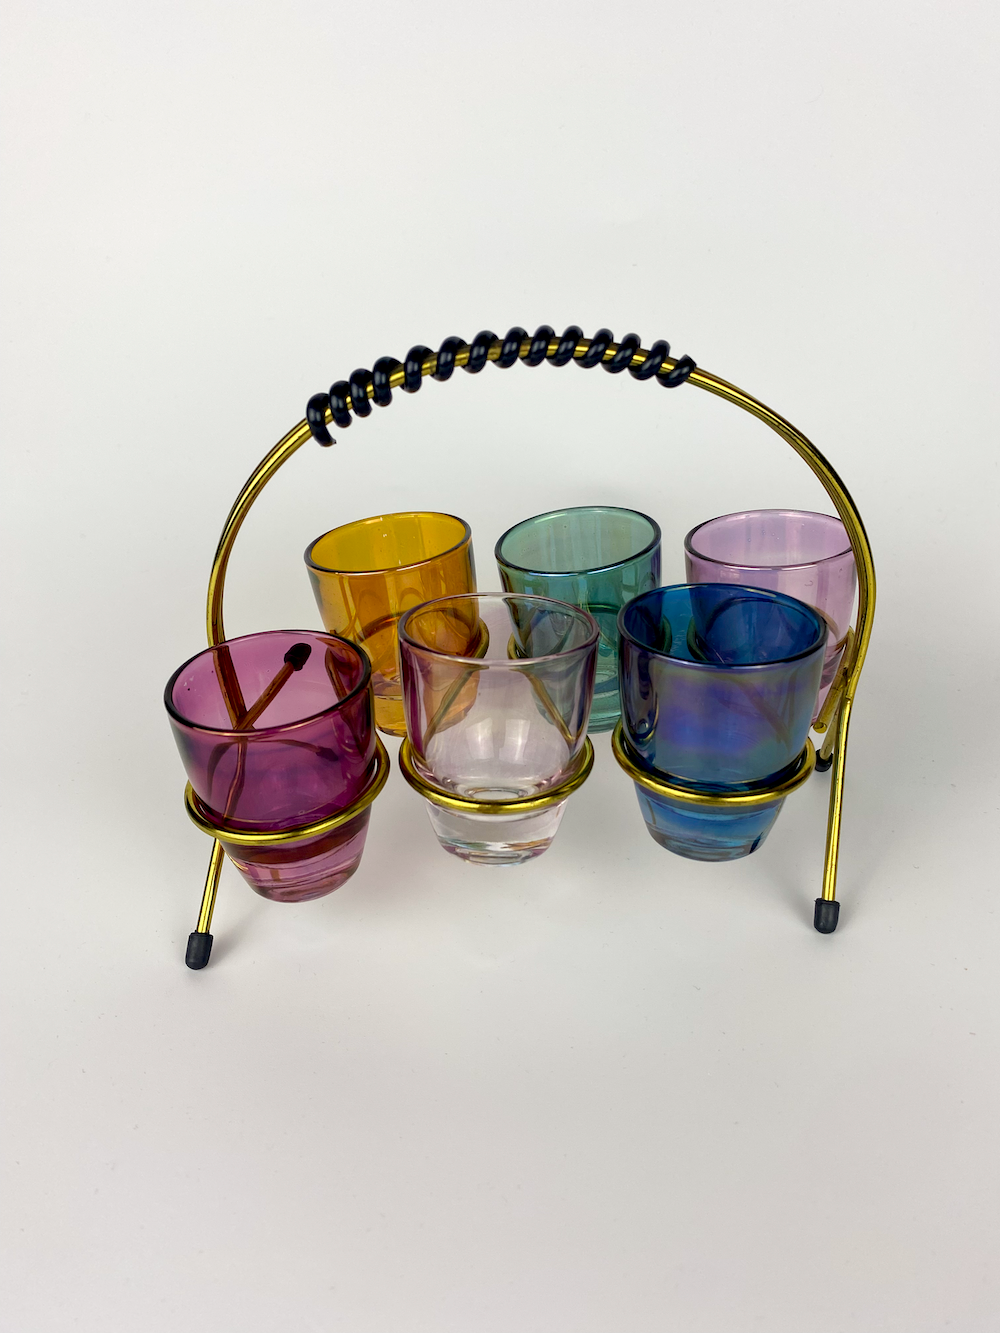 Multicoloured glass shot glasses sitting in a gold holder with a white background